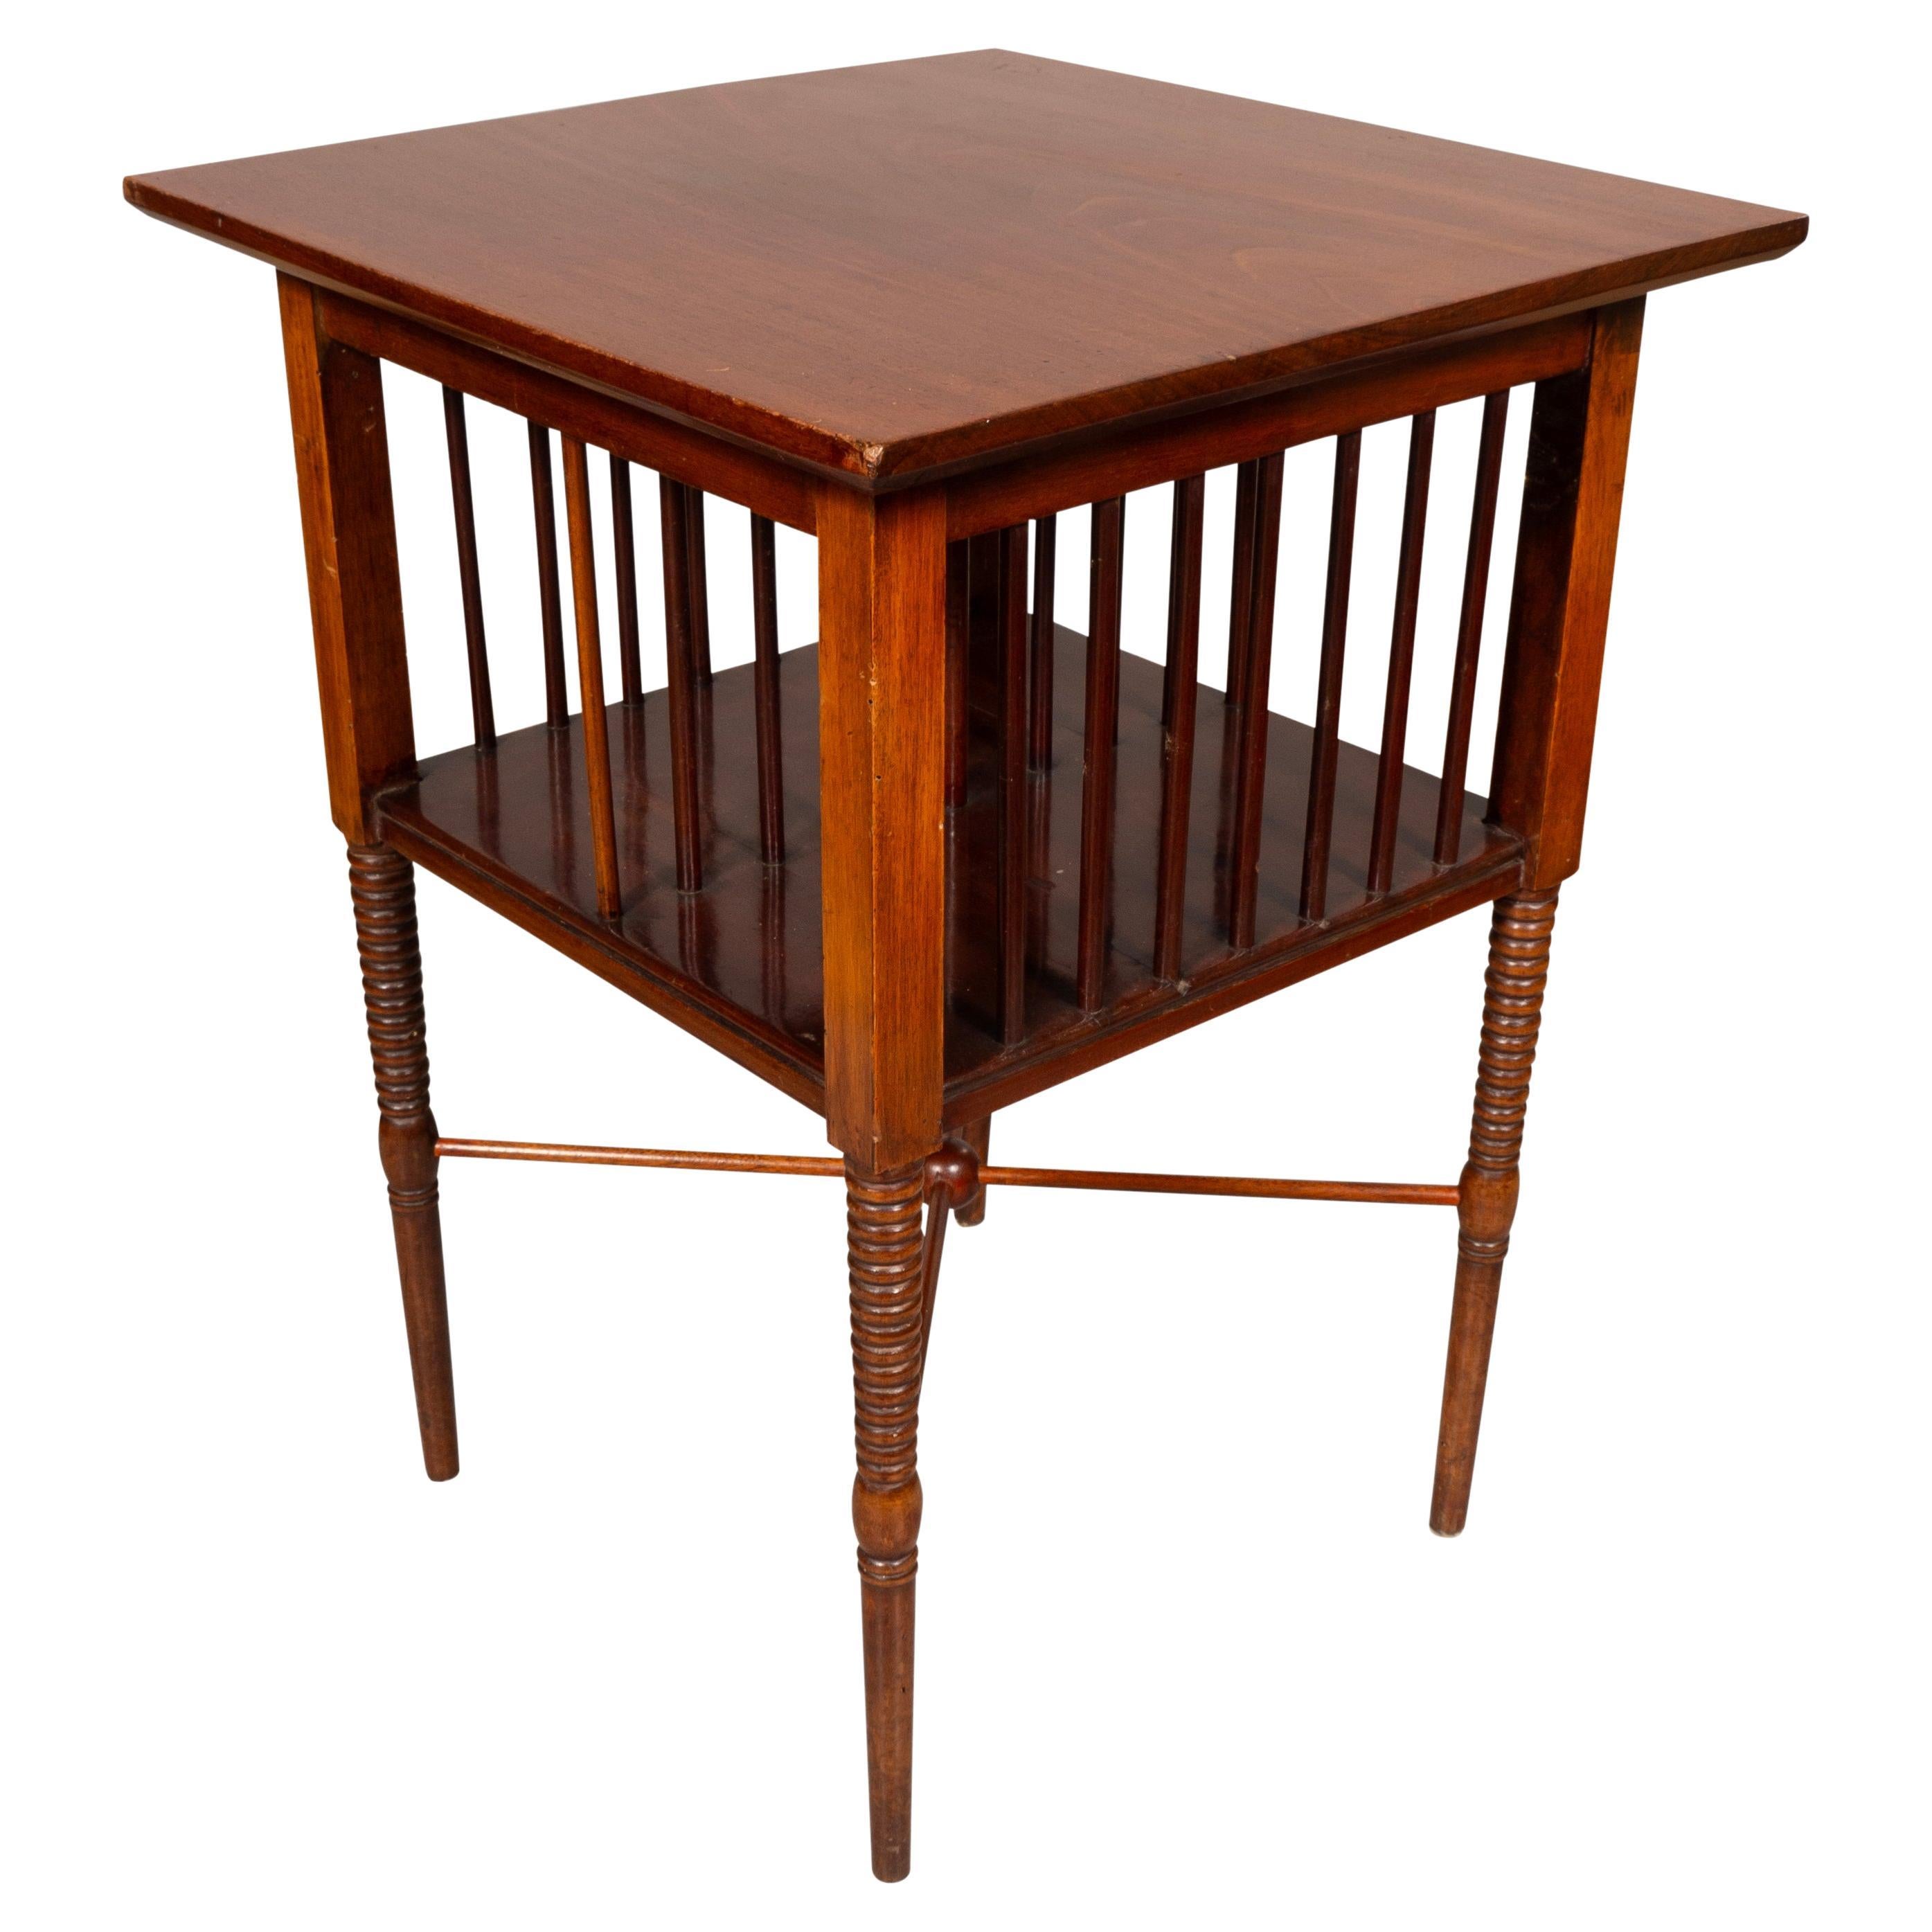 English Aesthetic Mahogany Table Attributed To Godwin For Sale